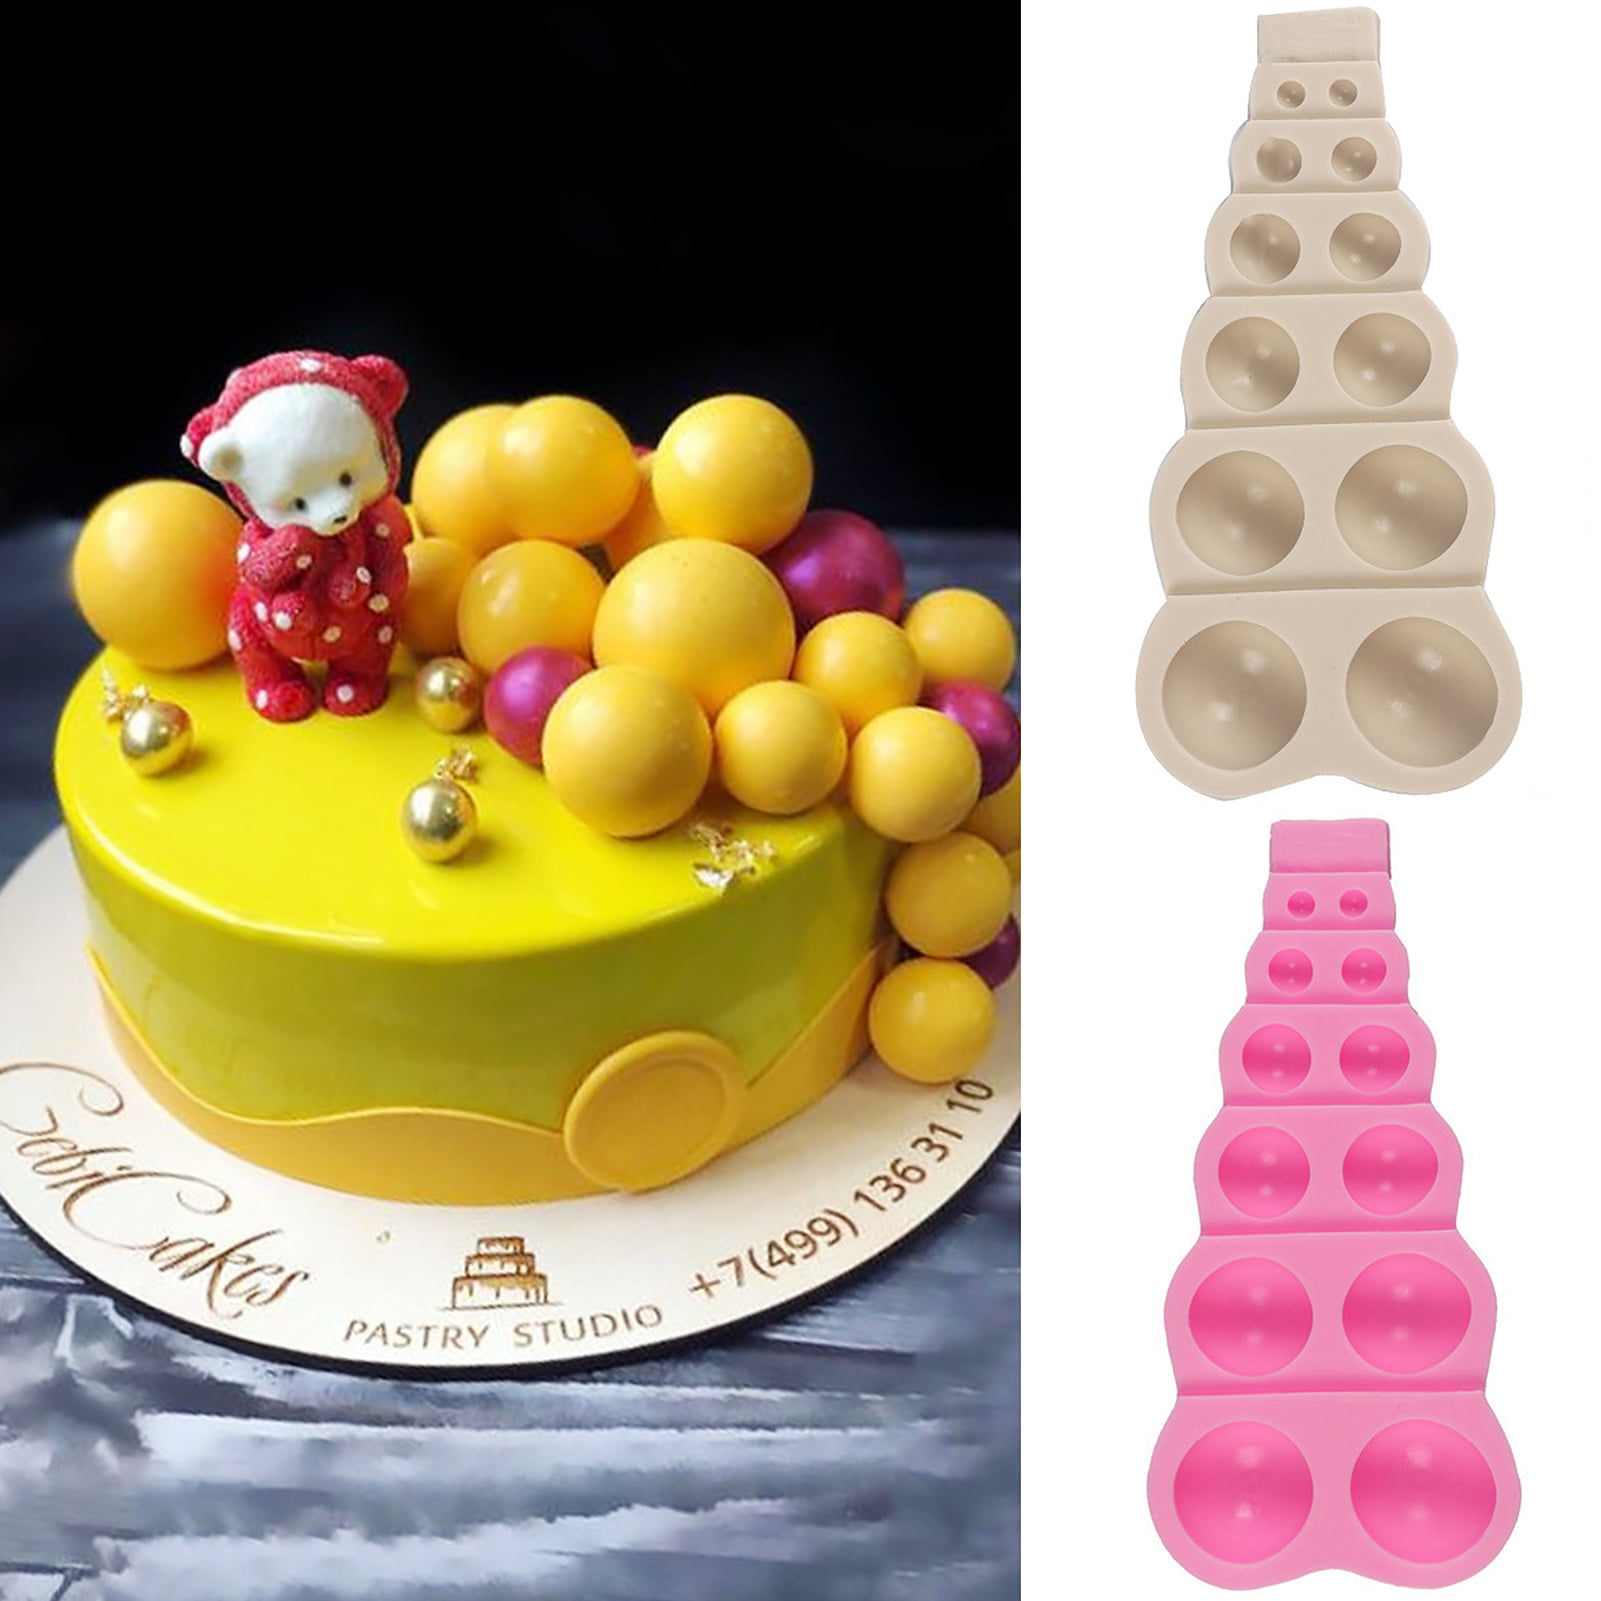 Disney set 3 Minnie mouse cake mould silicone Chocolate,jelly mould Baking decor